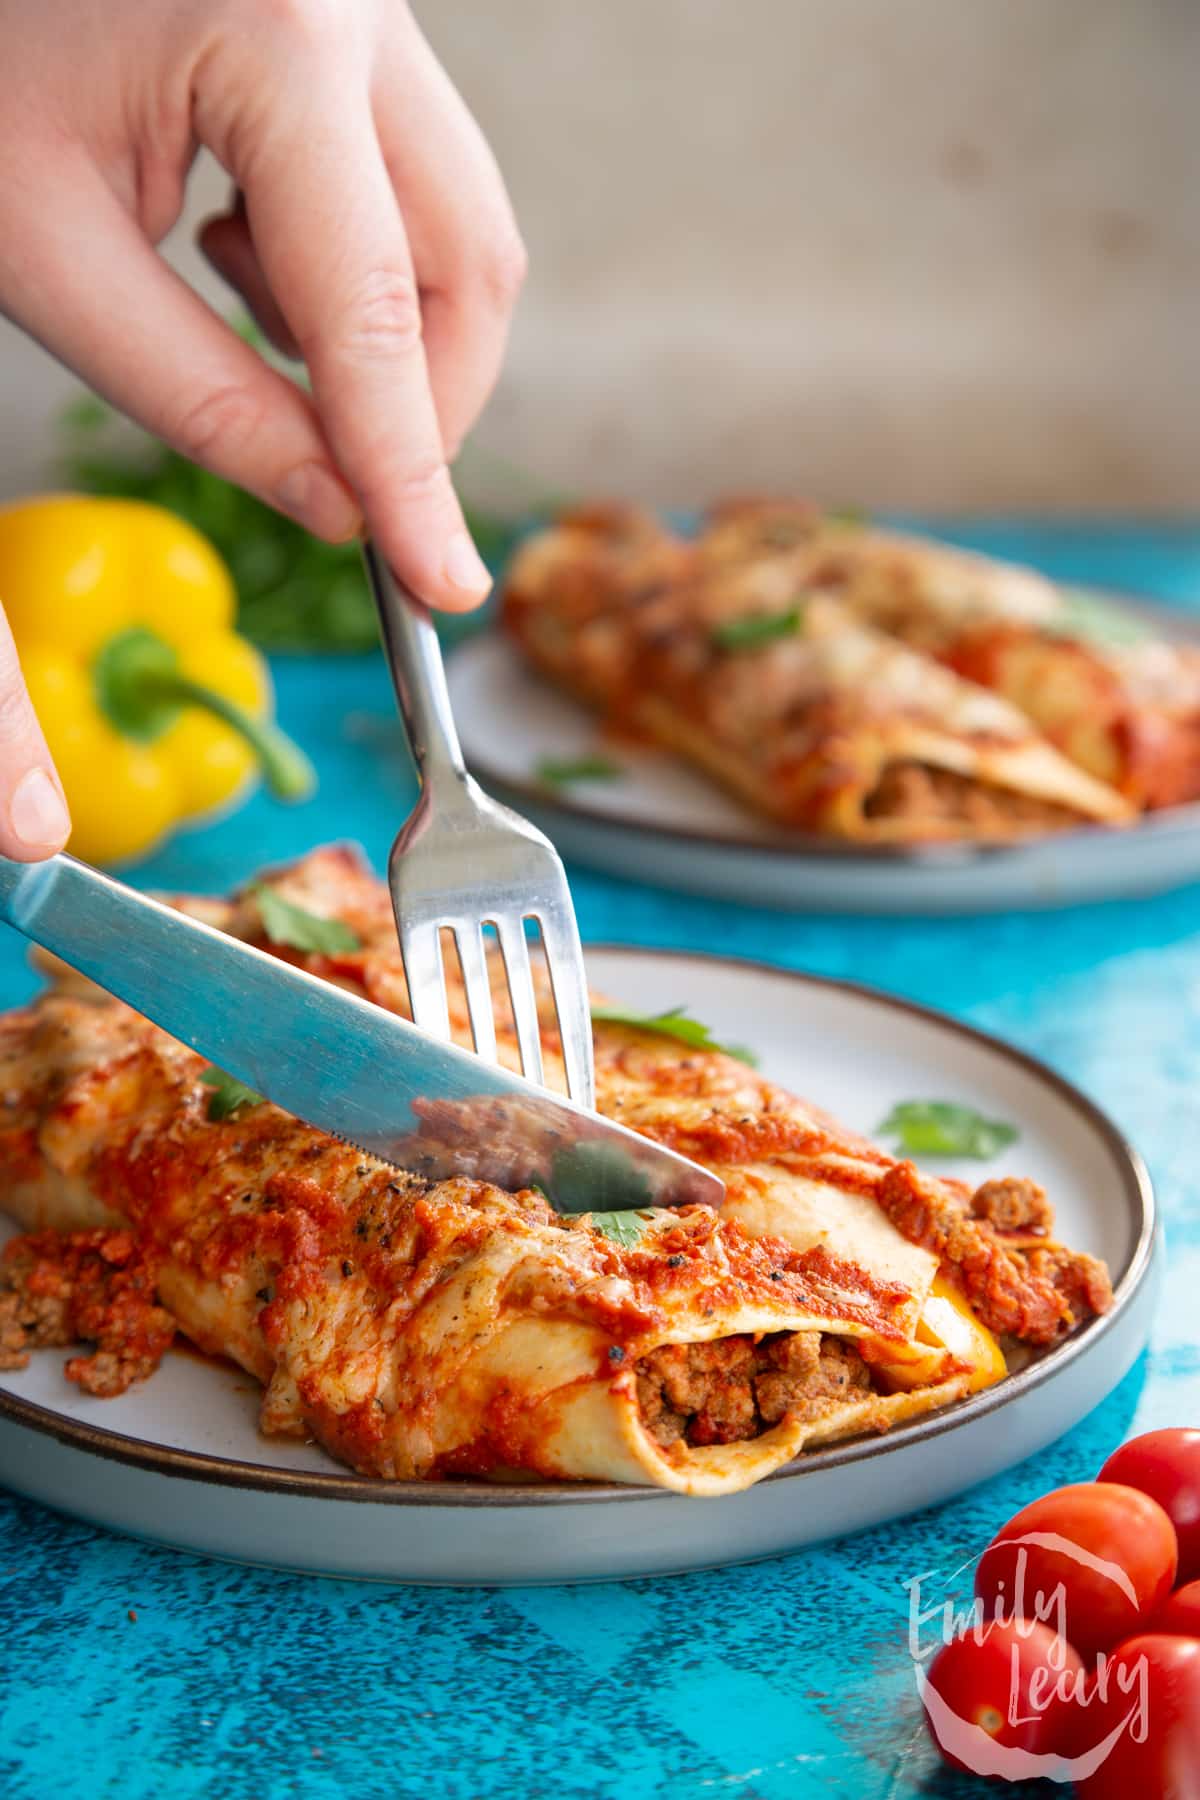 Quorn mince enchiladas served on a grey plate. Hands cut into them with a knife and fork.